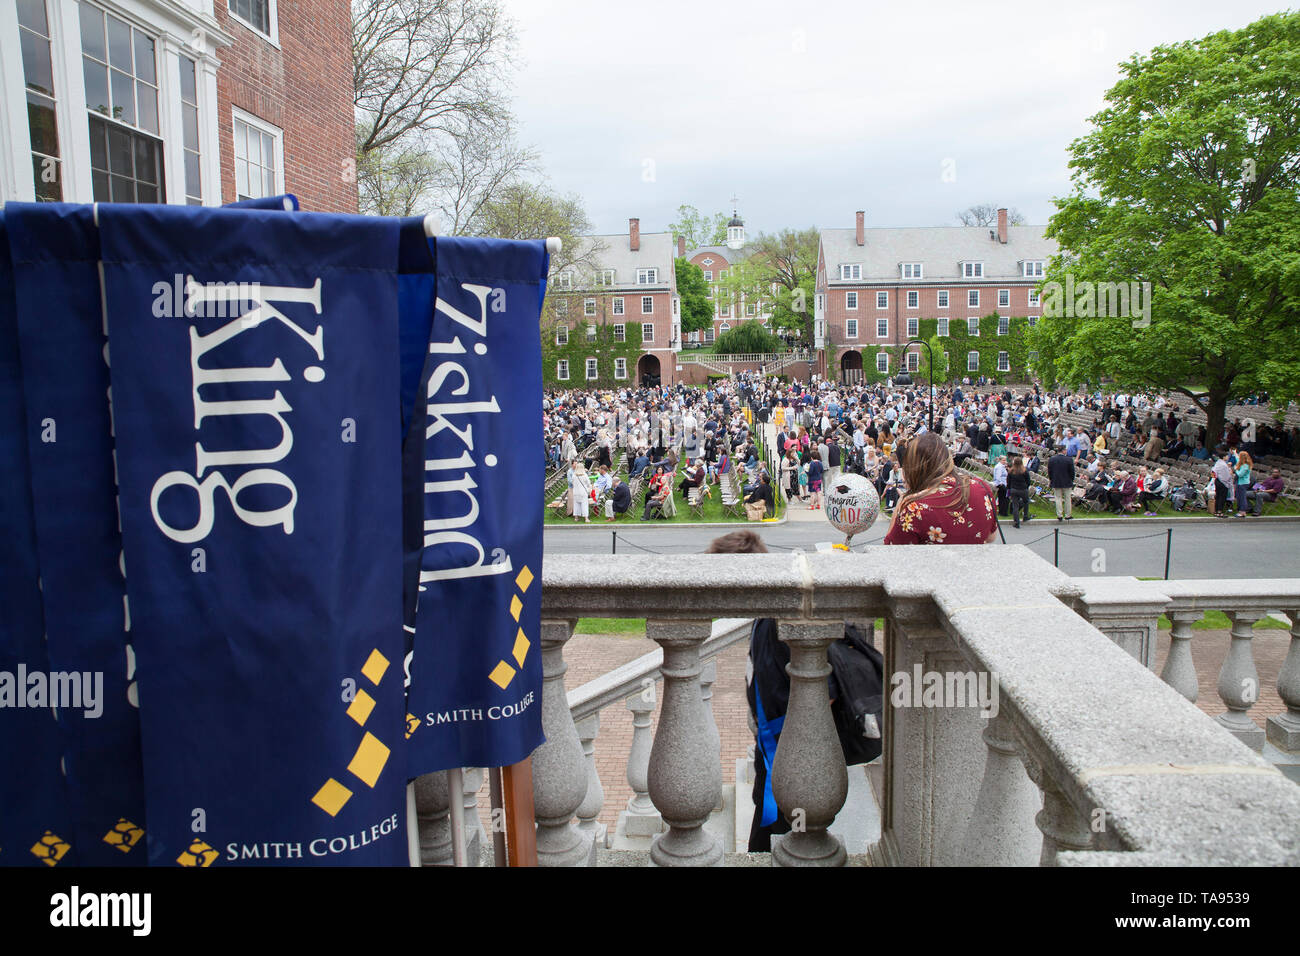 Banners with house names await procession for graduation at Smith College in Northampton, Massachusetts. Stock Photo